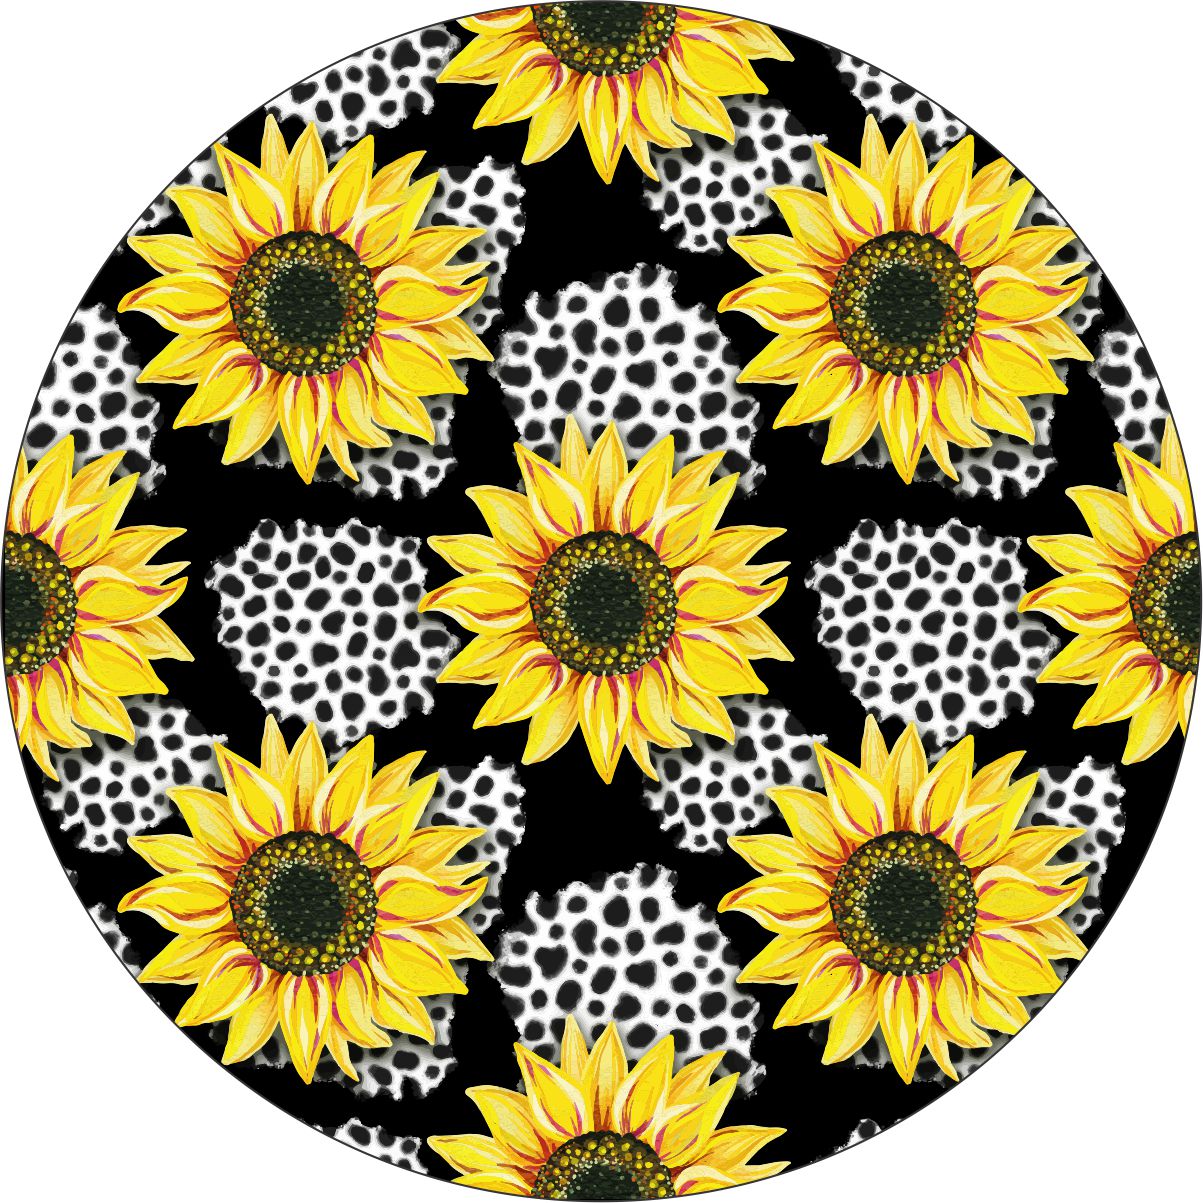 Black vinyl spare tire cover design with sunflower and leopard print.